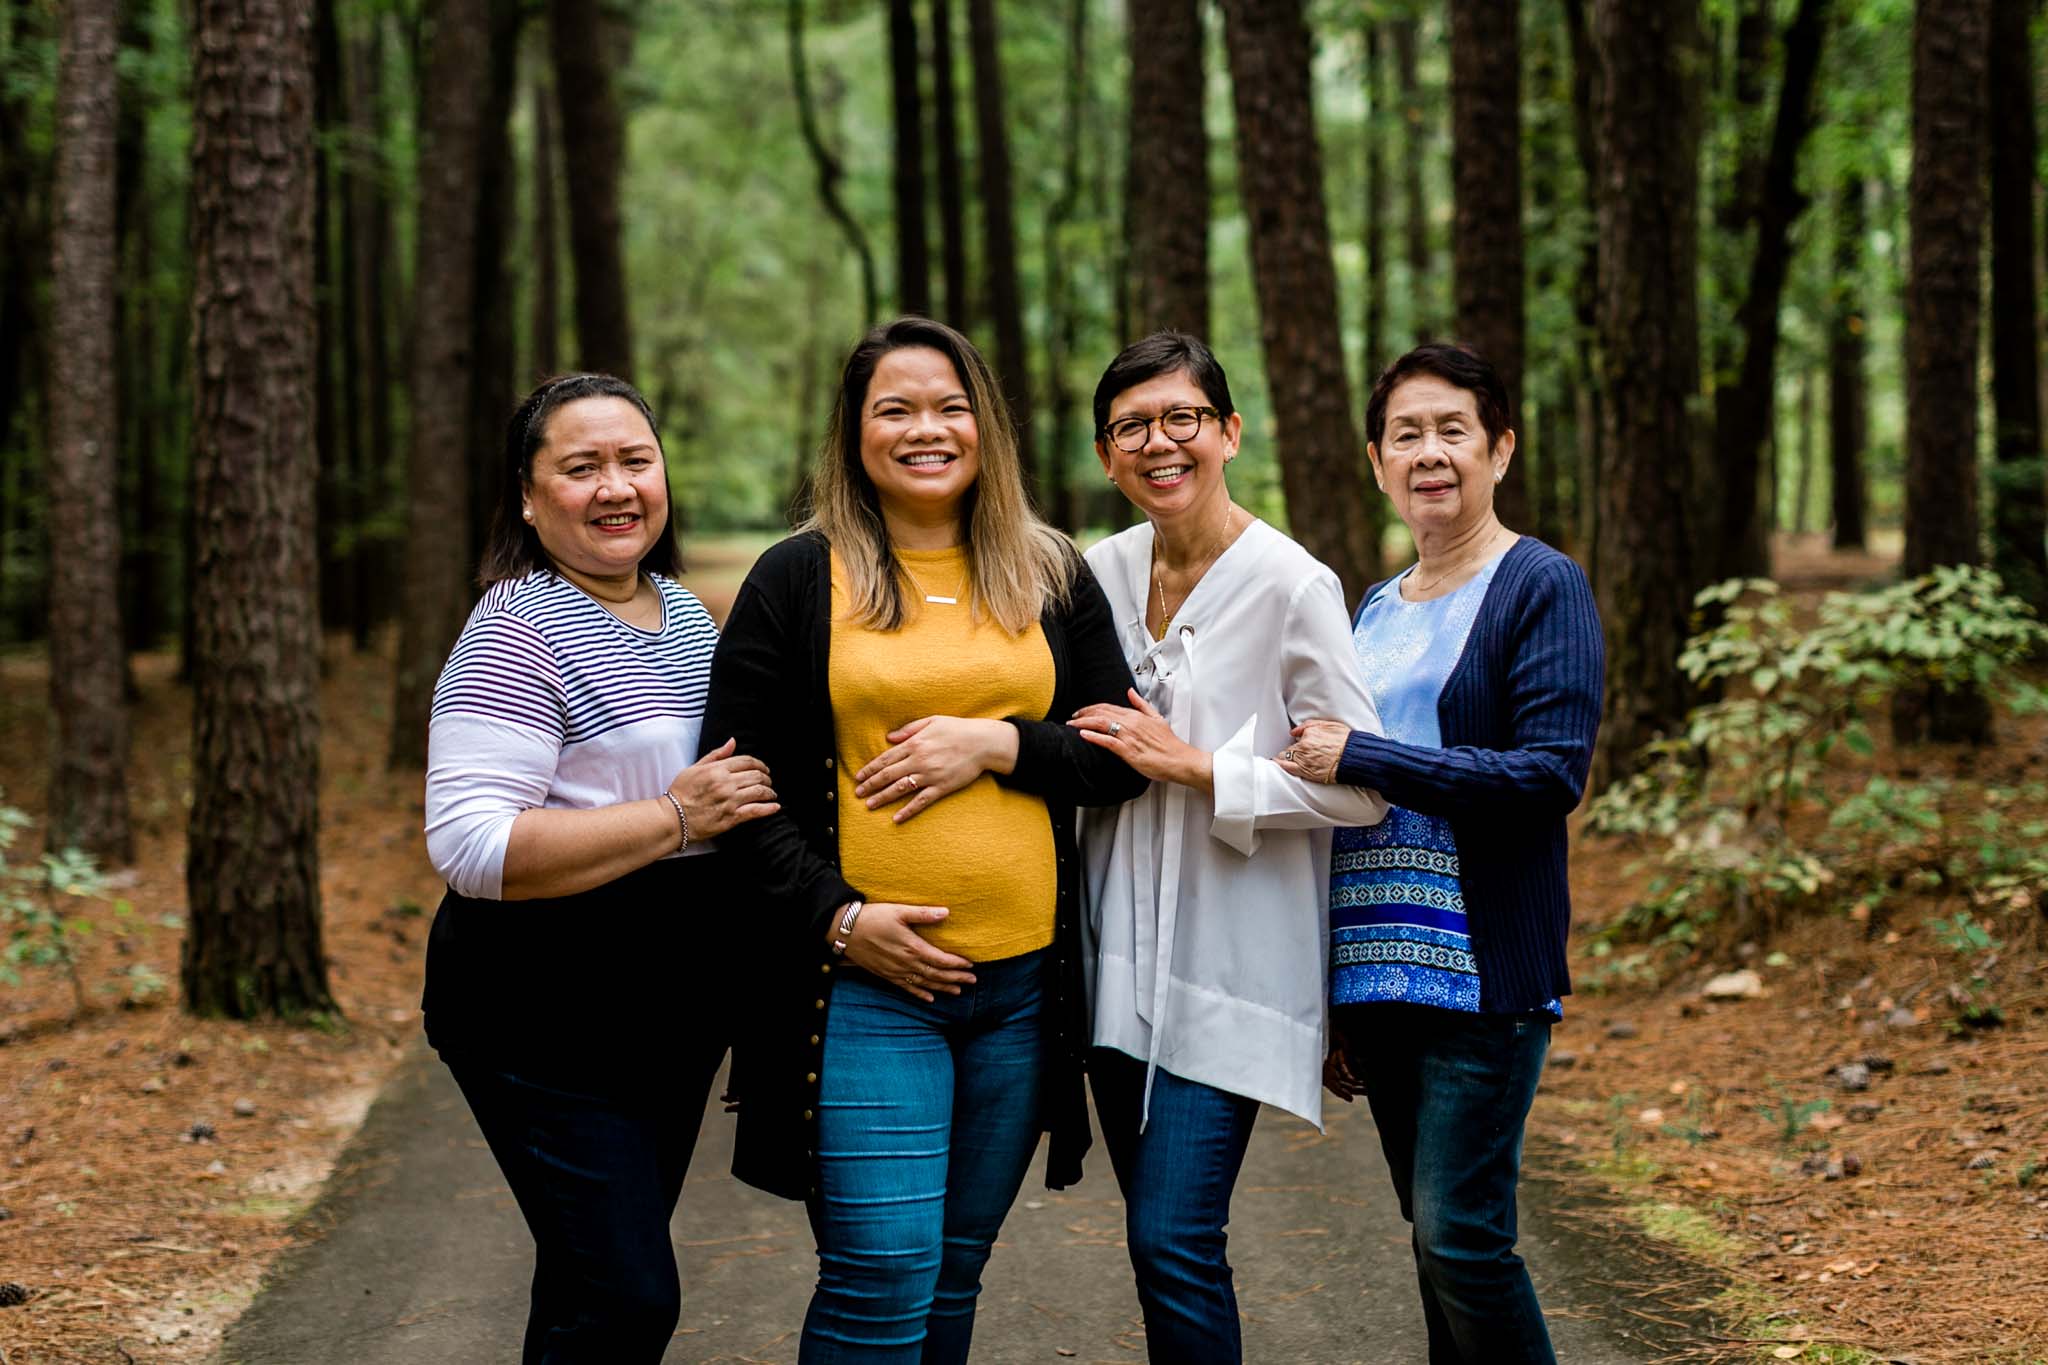 Raleigh Maternity Photographer | By G. Lin Photography | Outdoor maternity photo shoot at Umstead Park